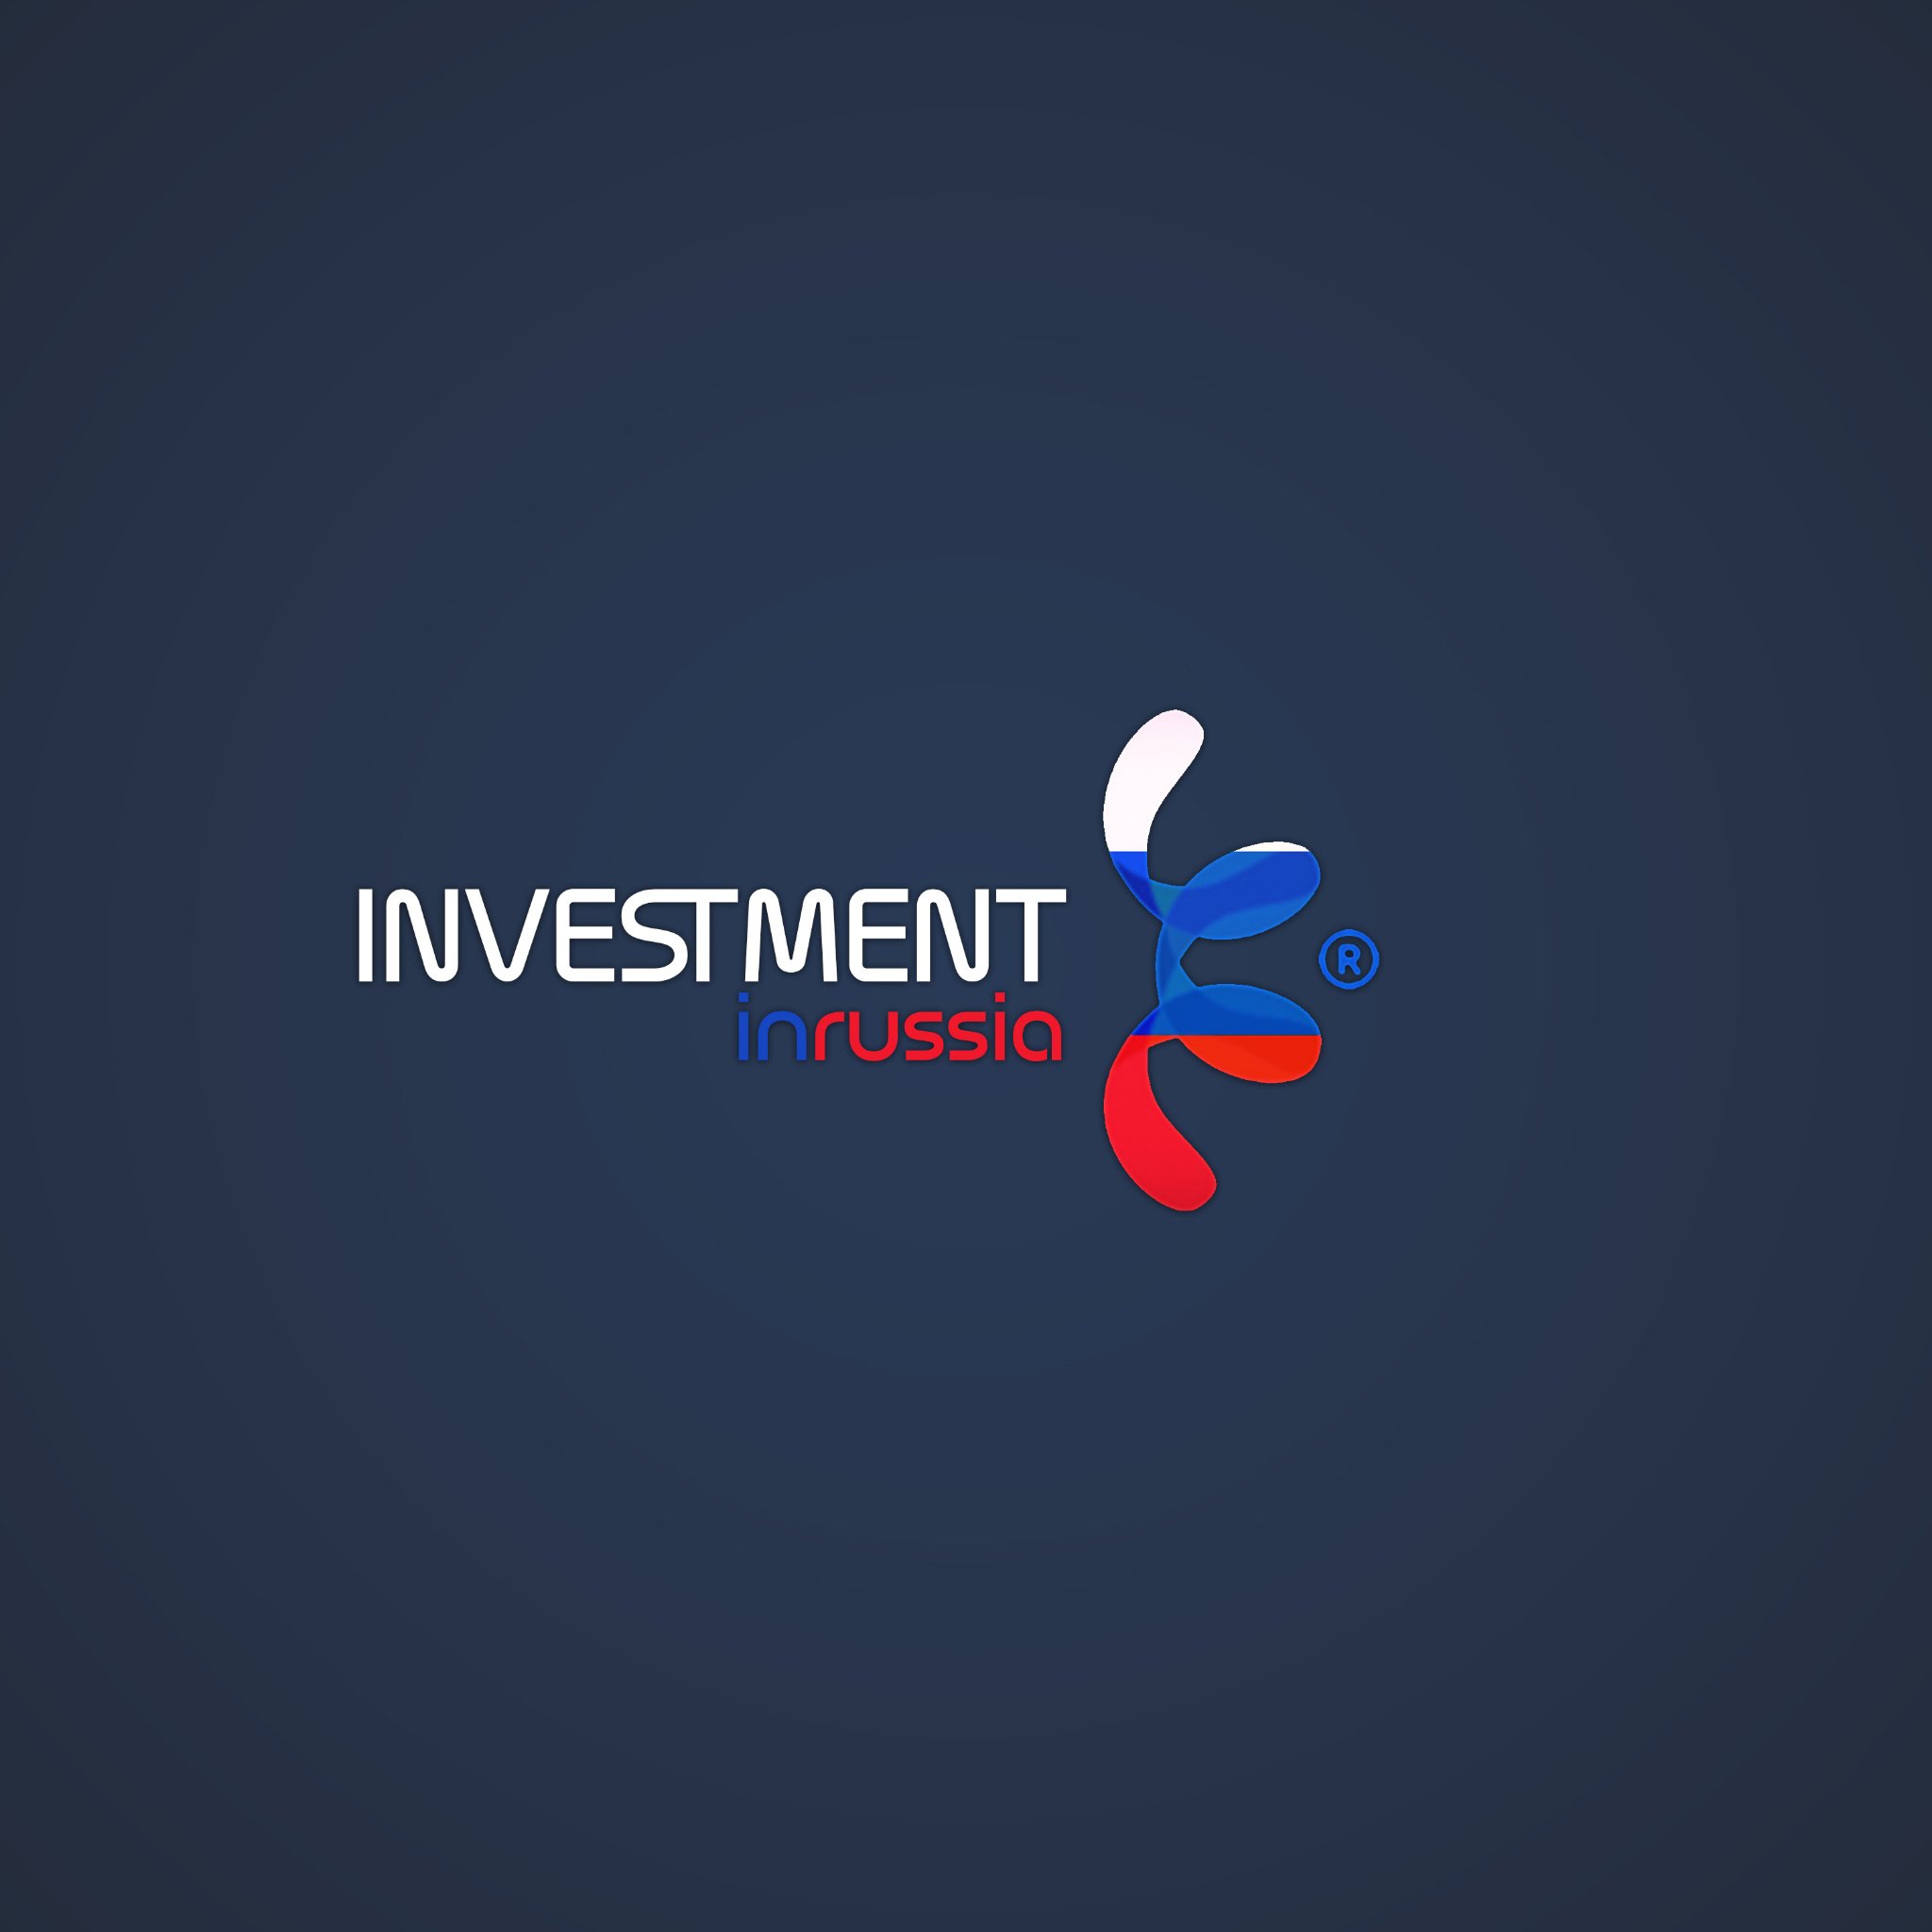 Our firm wants to offer foreign investors the best investment possibilities in Russia. https://t.co/DgrDJZl9yO
+442080893989